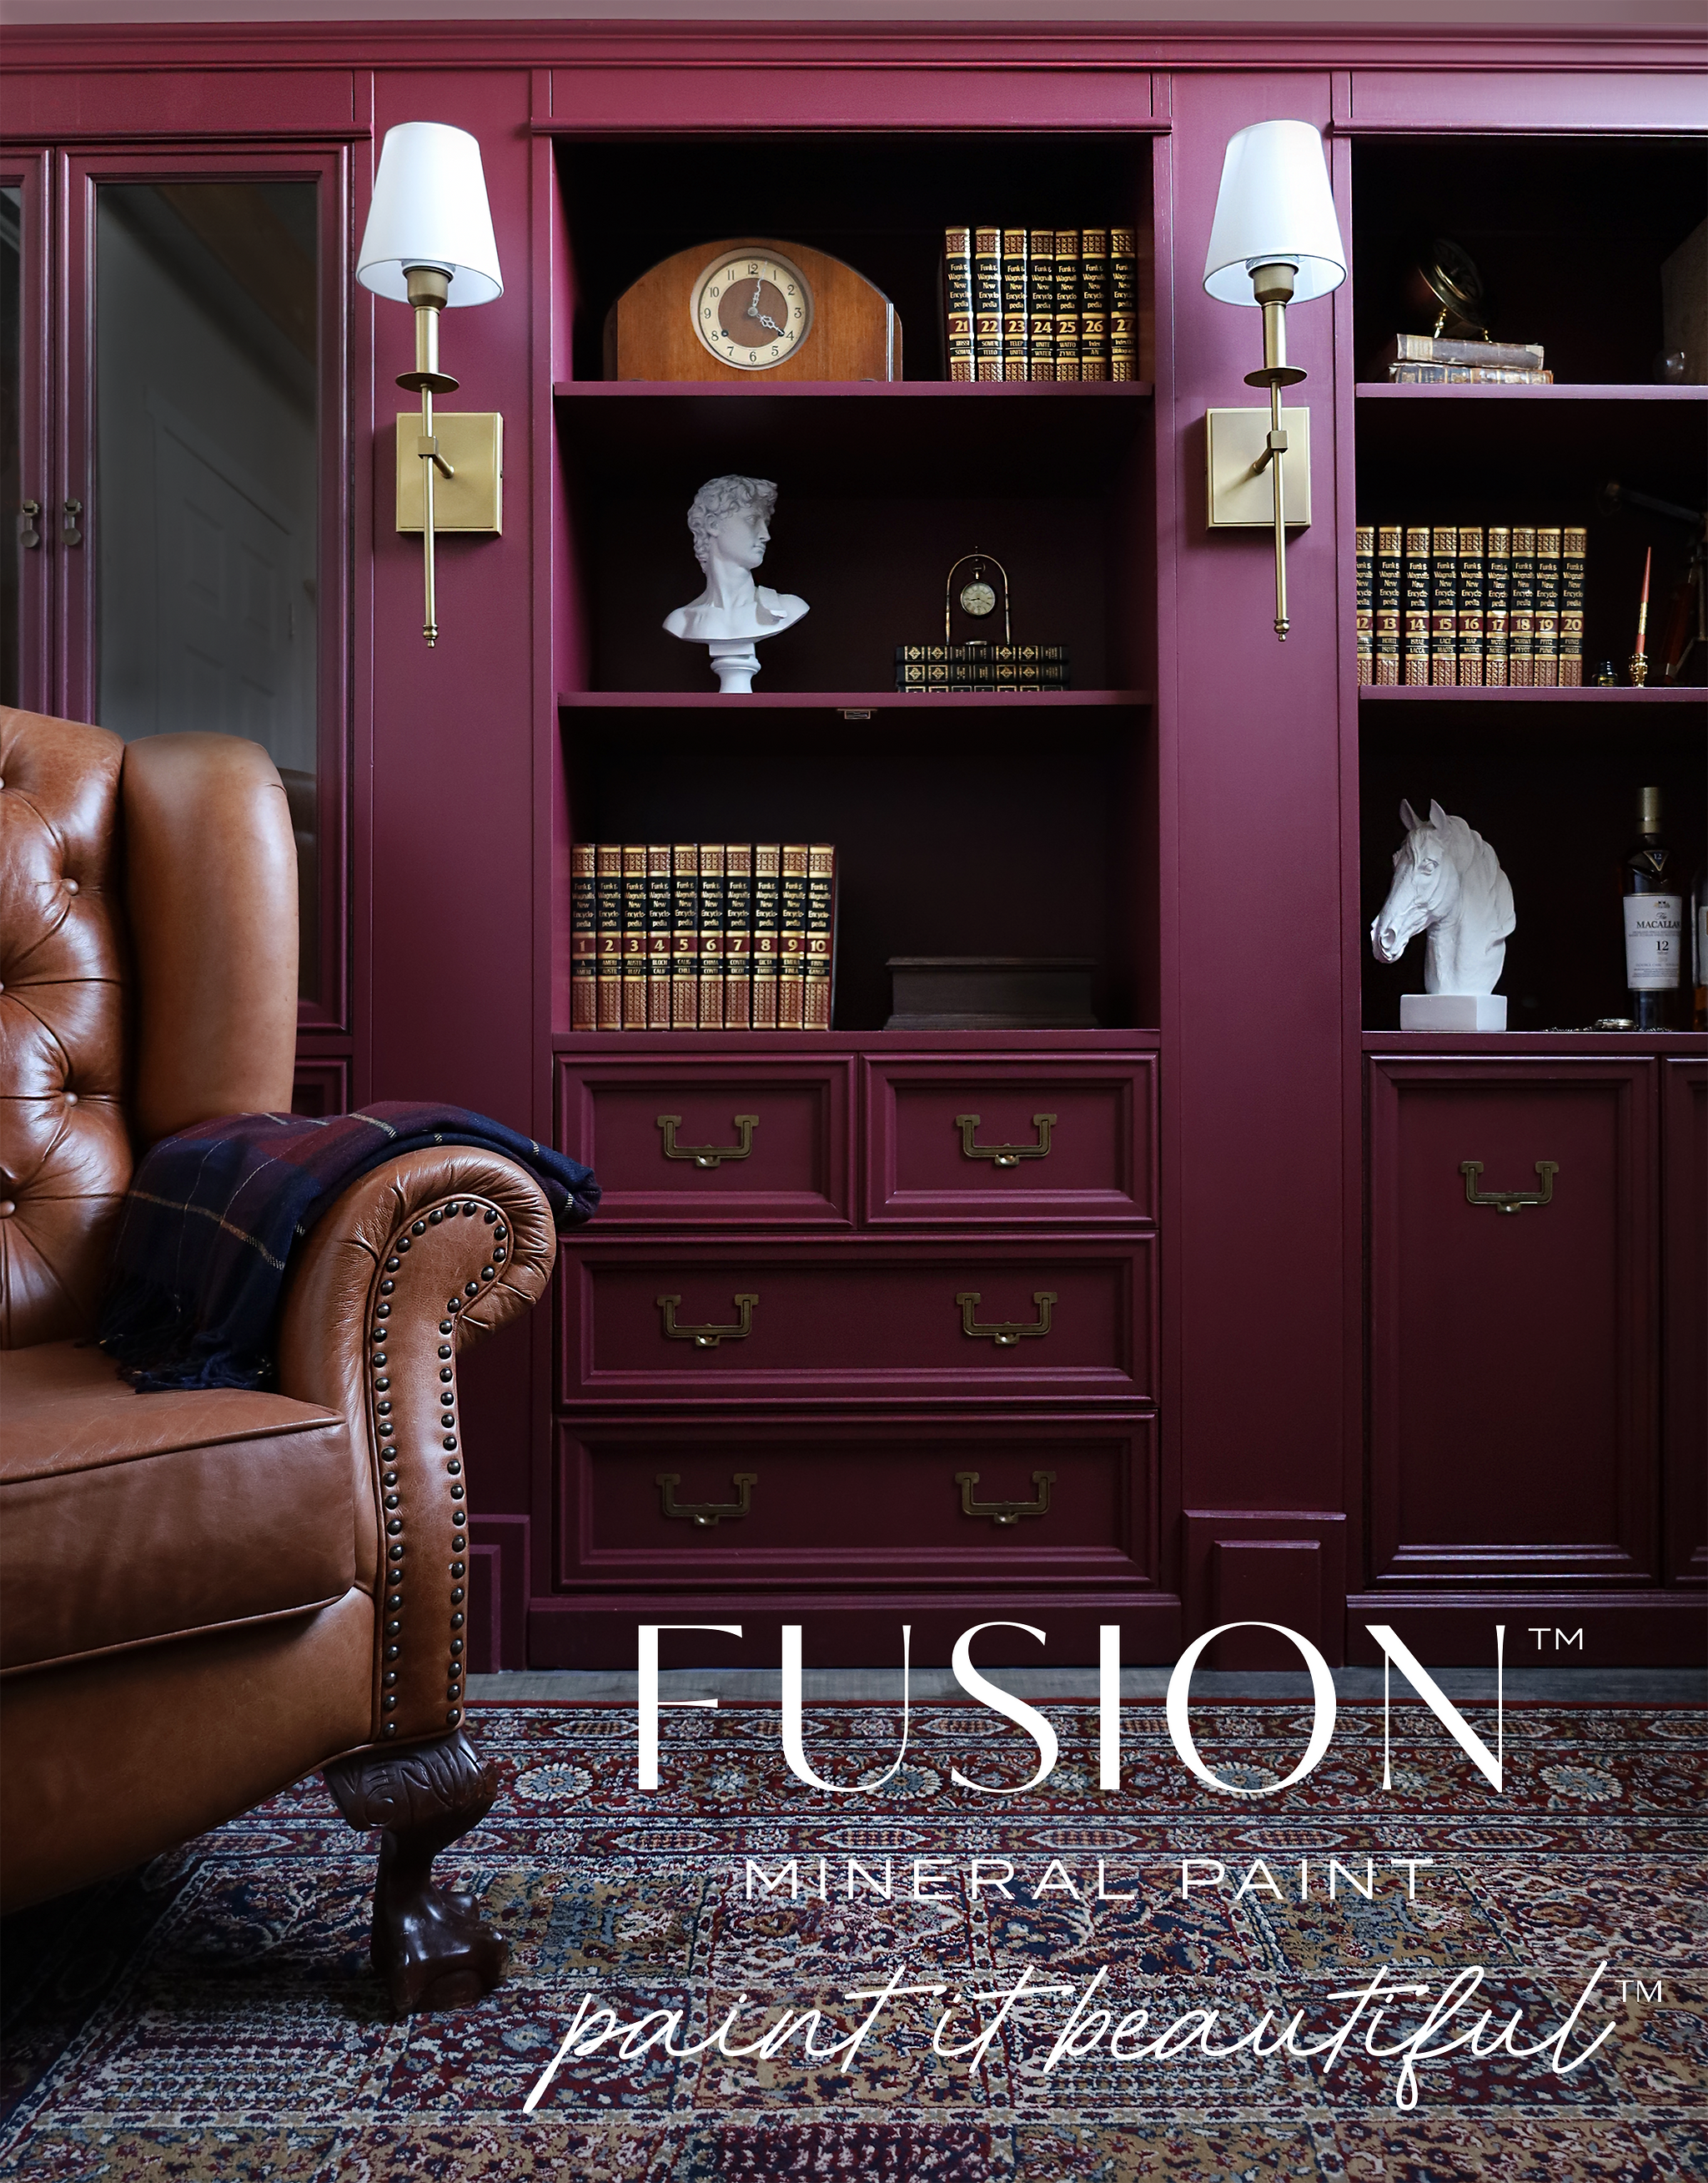 Winchester mini Fusion Mineral Paint Goed Gestyled